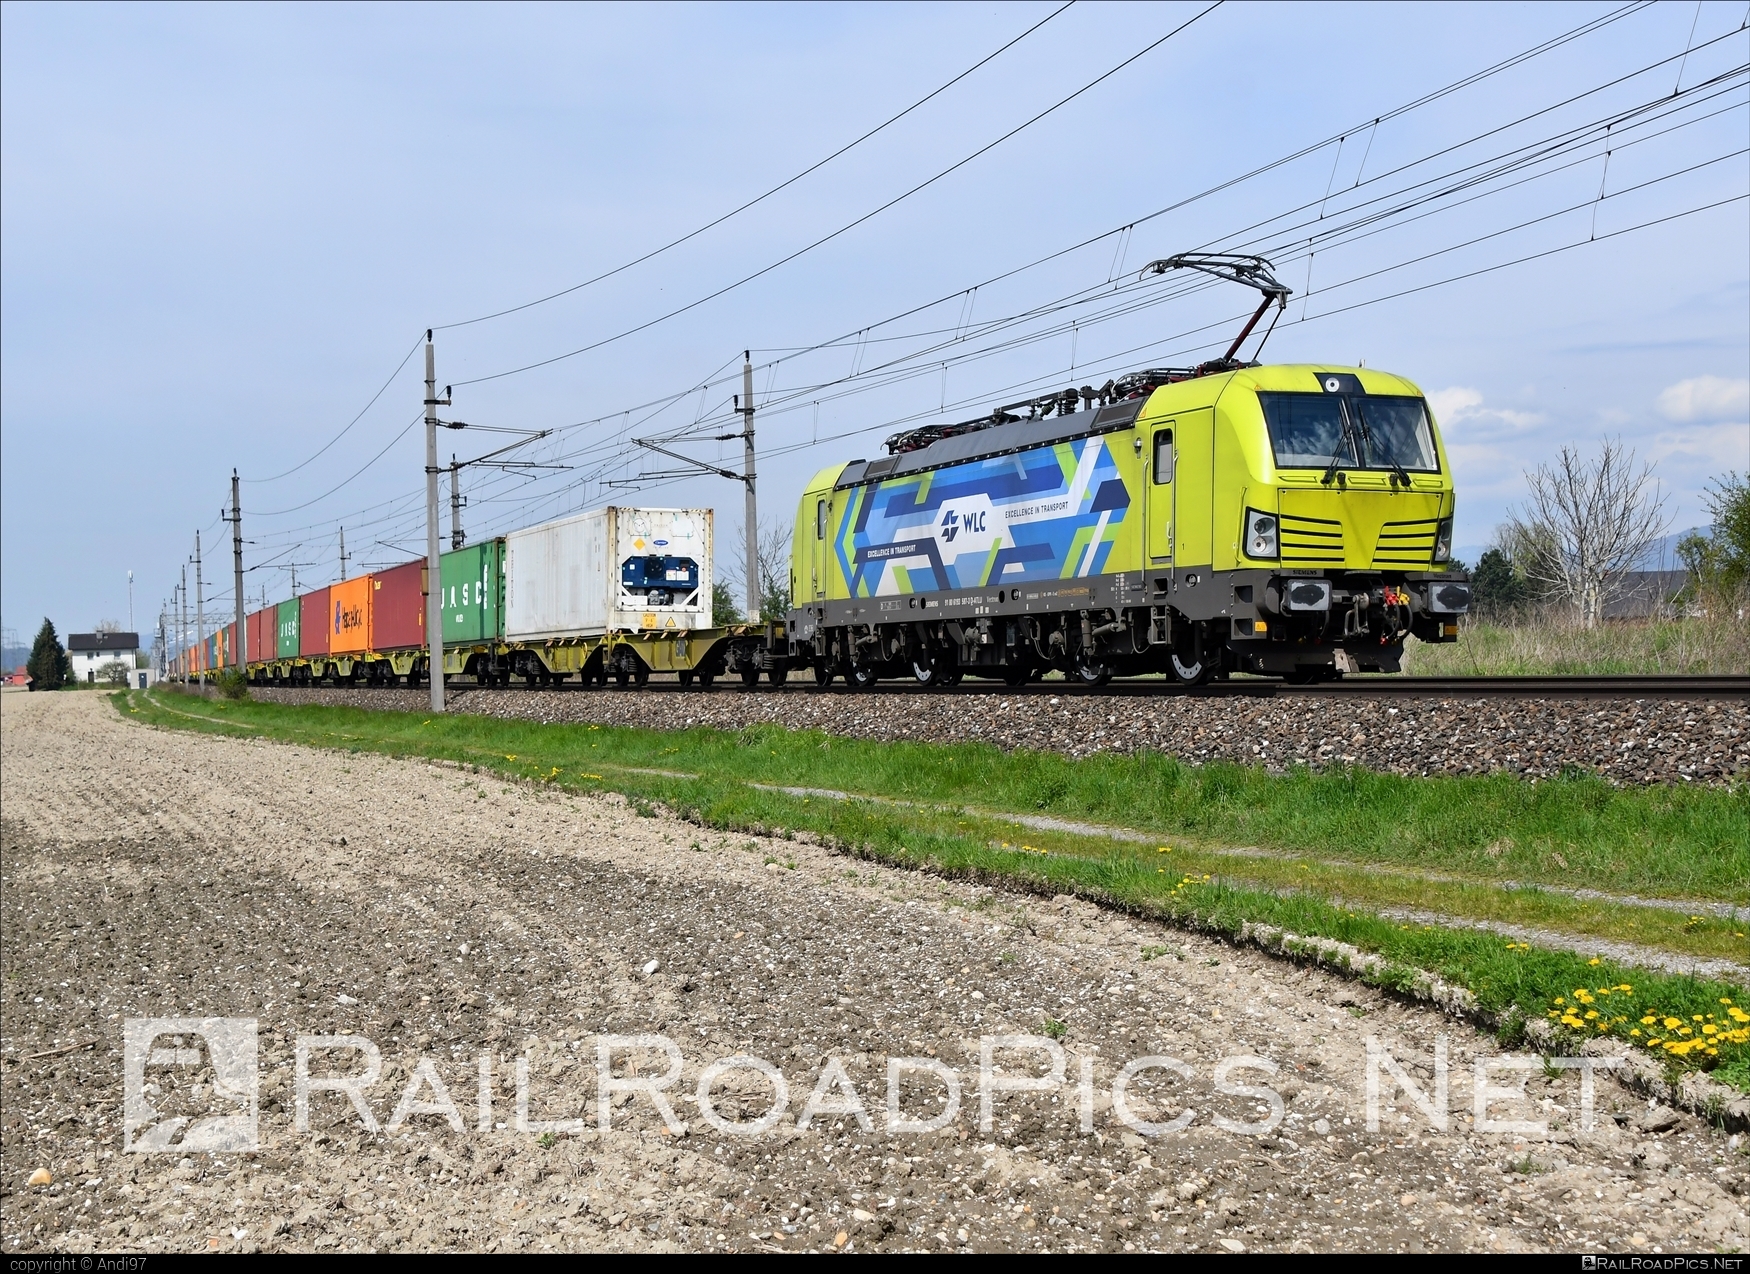 Siemens Vectron MS - 193 587 operated by Wiener Lokalbahnen Cargo GmbH #alphatrainsluxembourg #container #flatwagon #siemens #siemensVectron #siemensVectronMS #vectron #vectronMS #wienerlokalbahnencargo #wienerlokalbahnencargogmbh #wlc